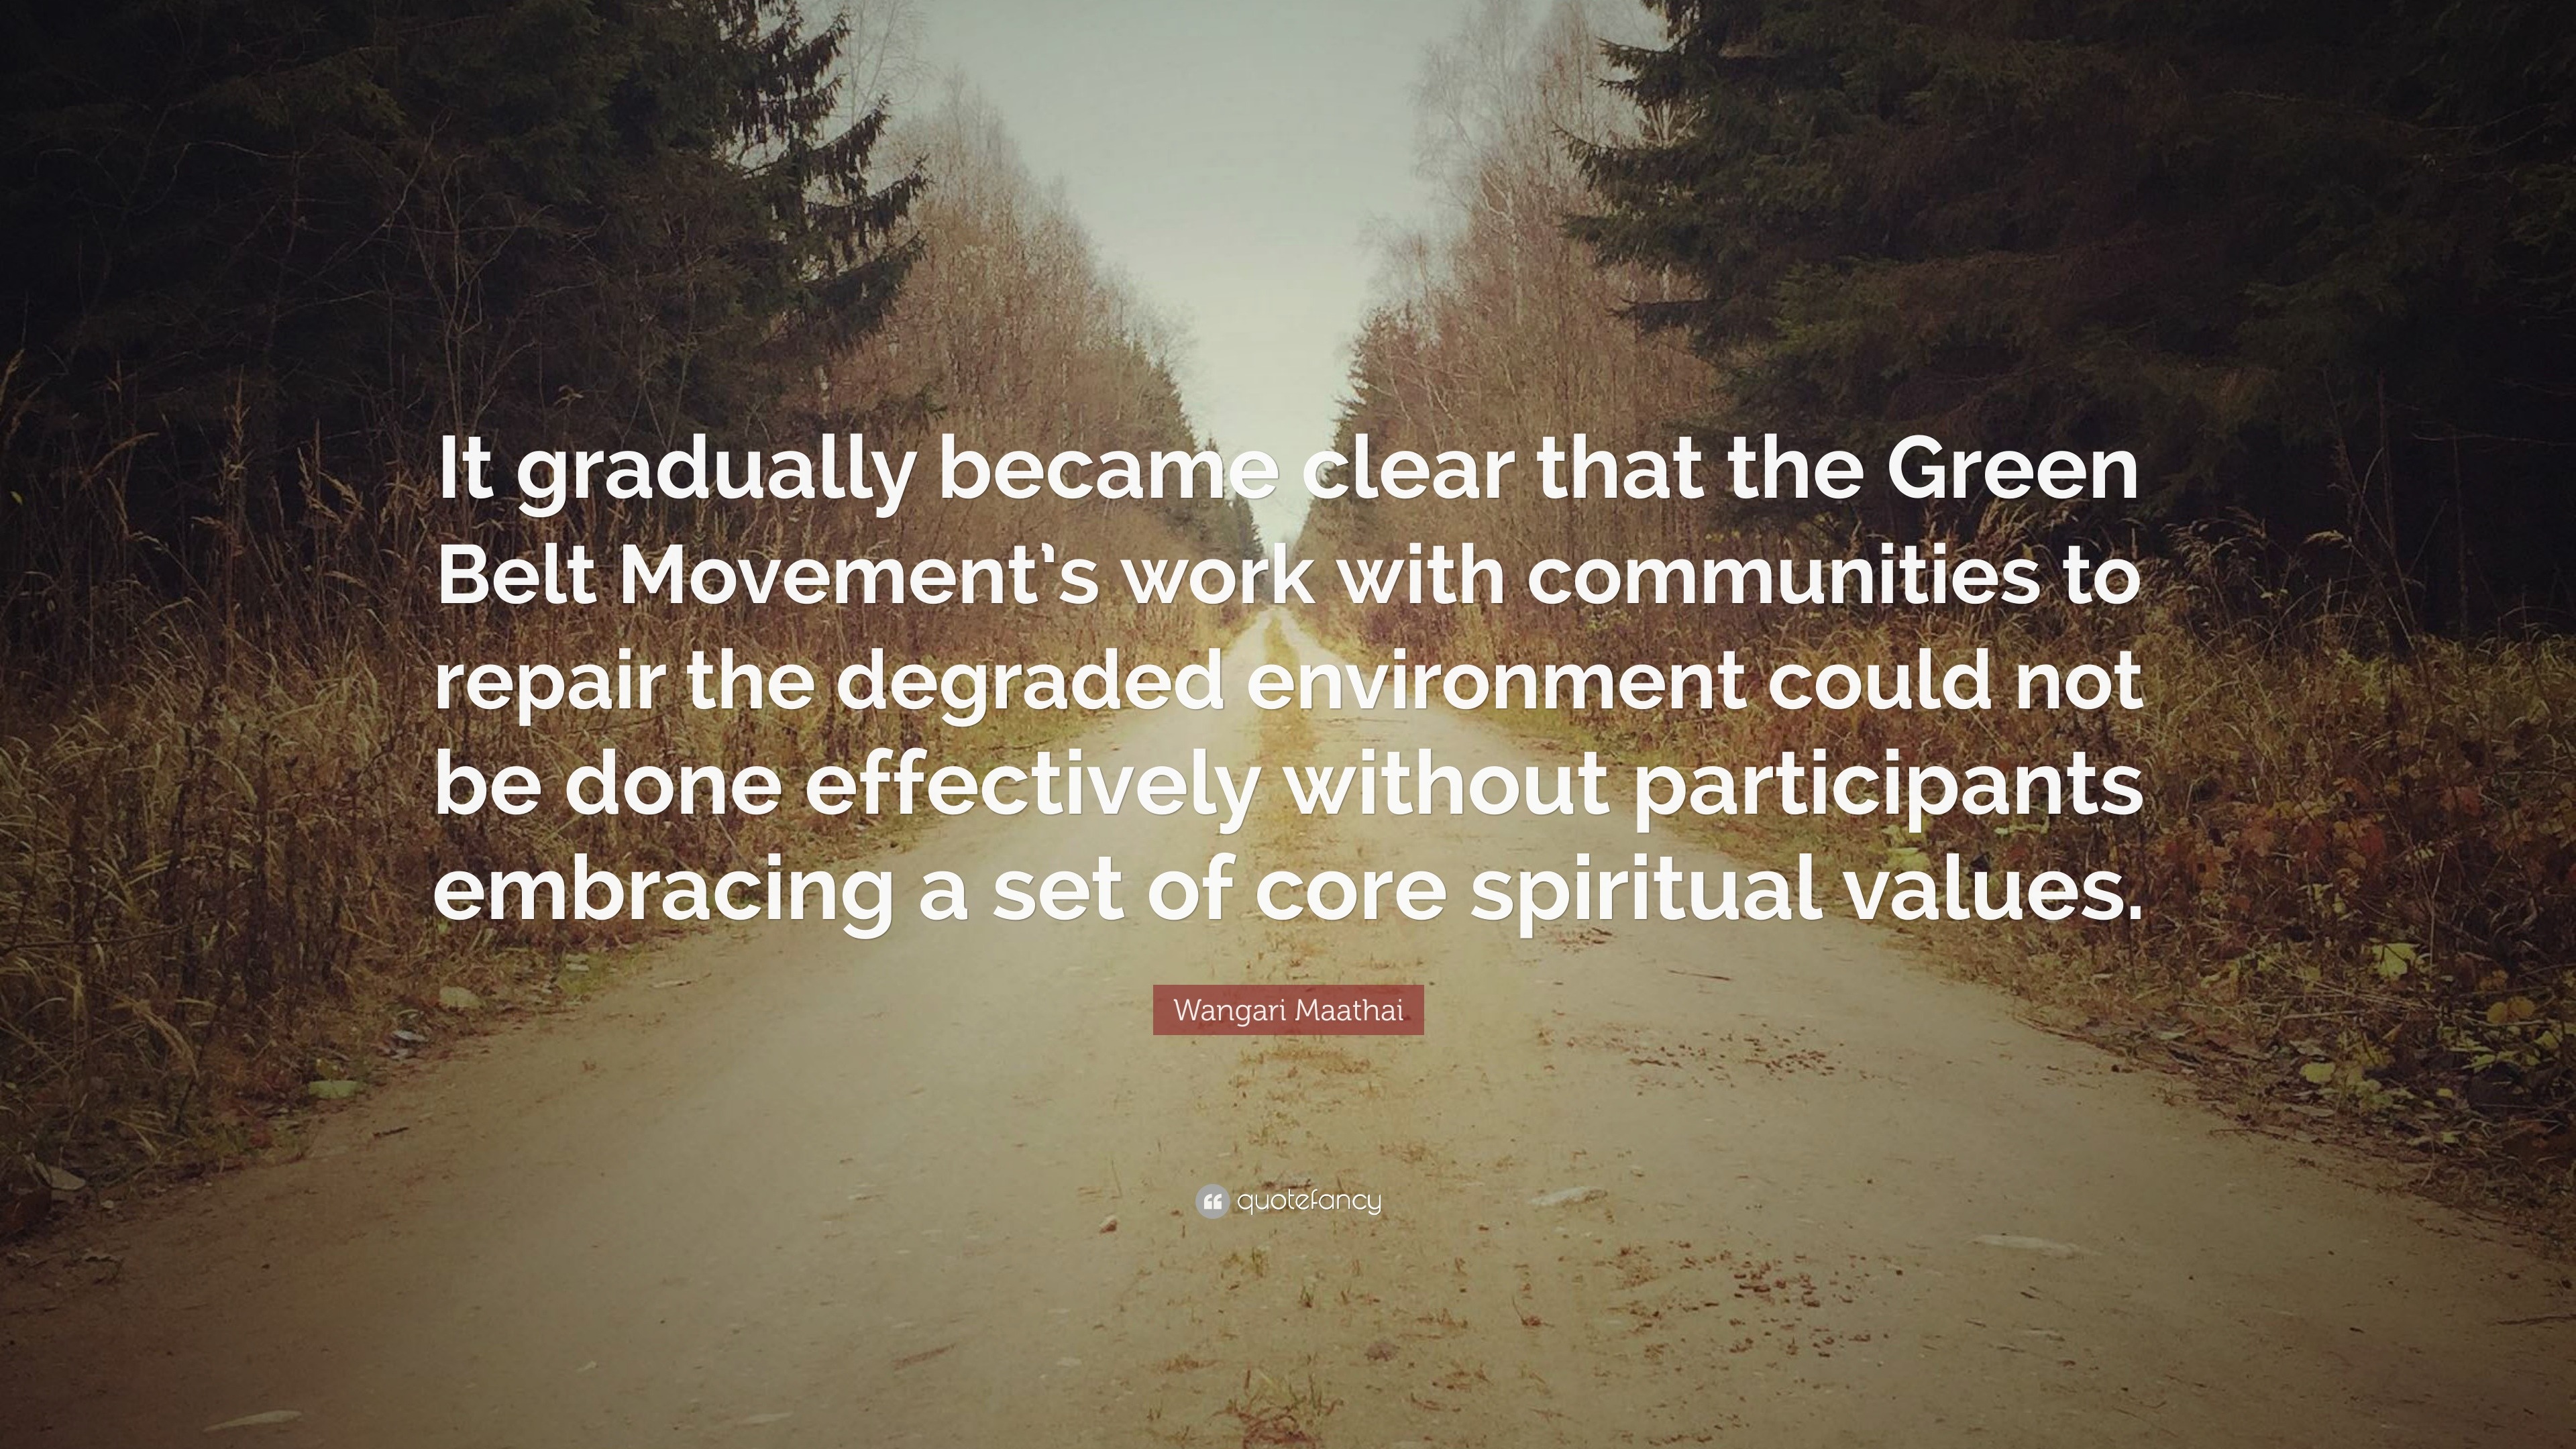 Wangari Maathai Quote: “It gradually became clear that the Green Belt